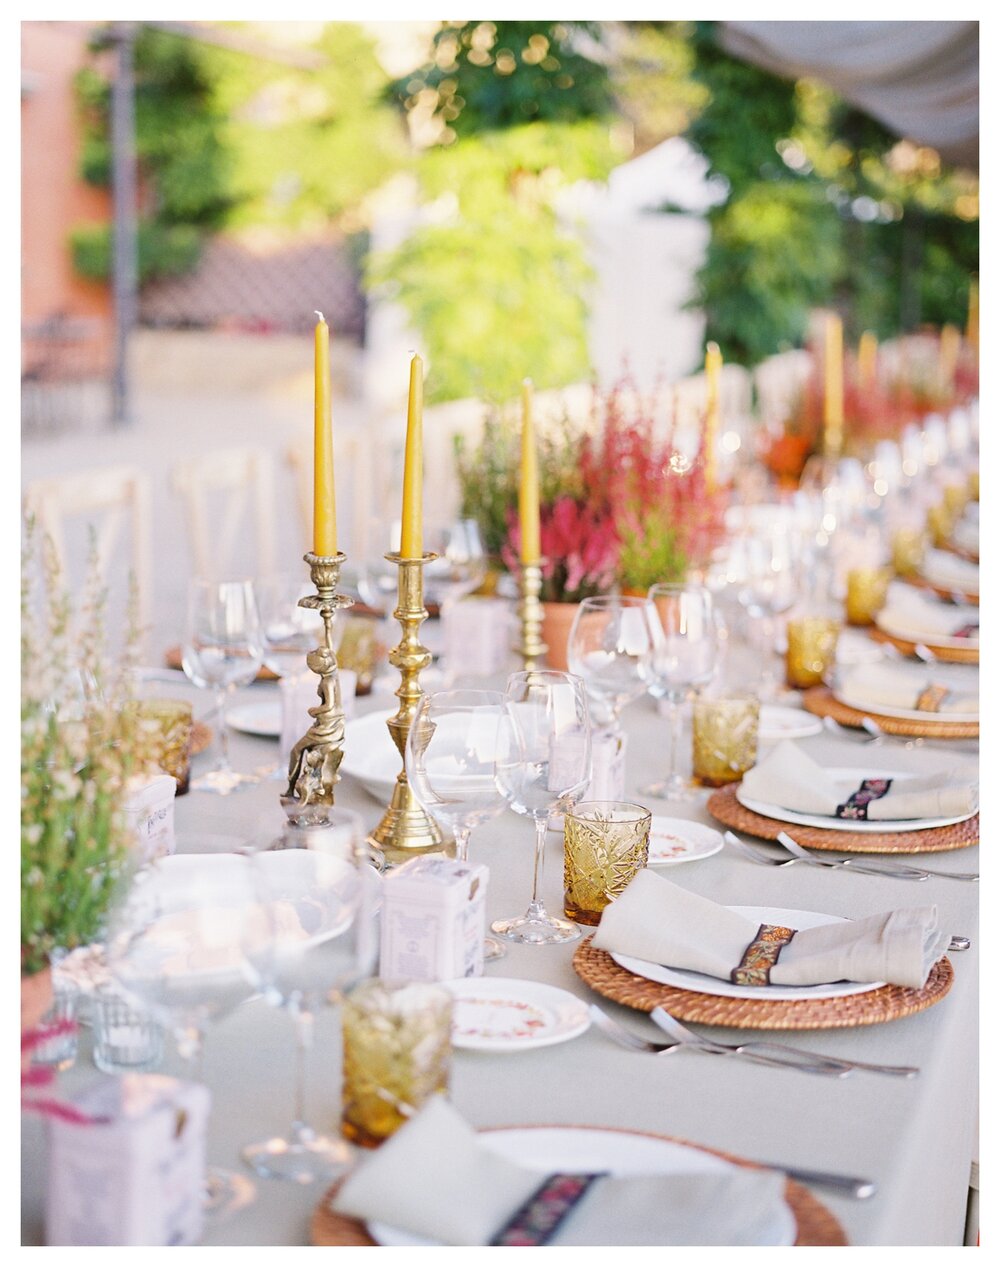  tuscany wedding table setting, destination wedding at villa le fontanelle in Florence Italy, Tuscan wedding ideas, tuscany wedding decor 